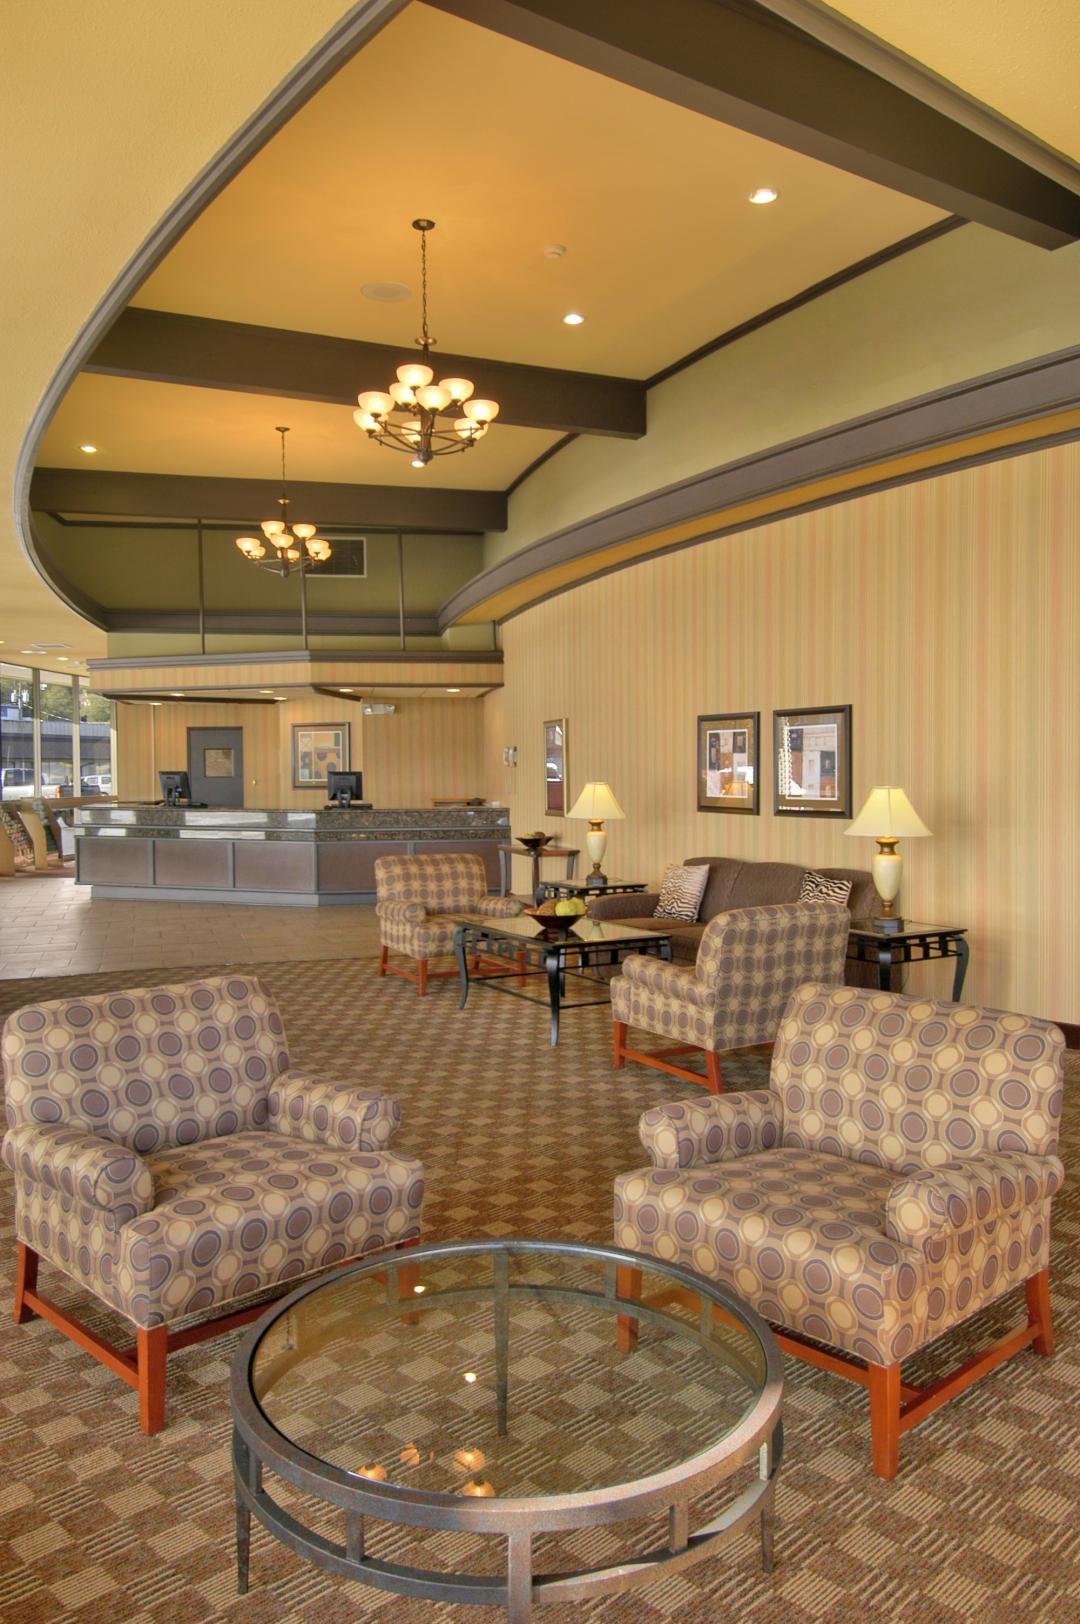 Lobby with high vaulted ceilings